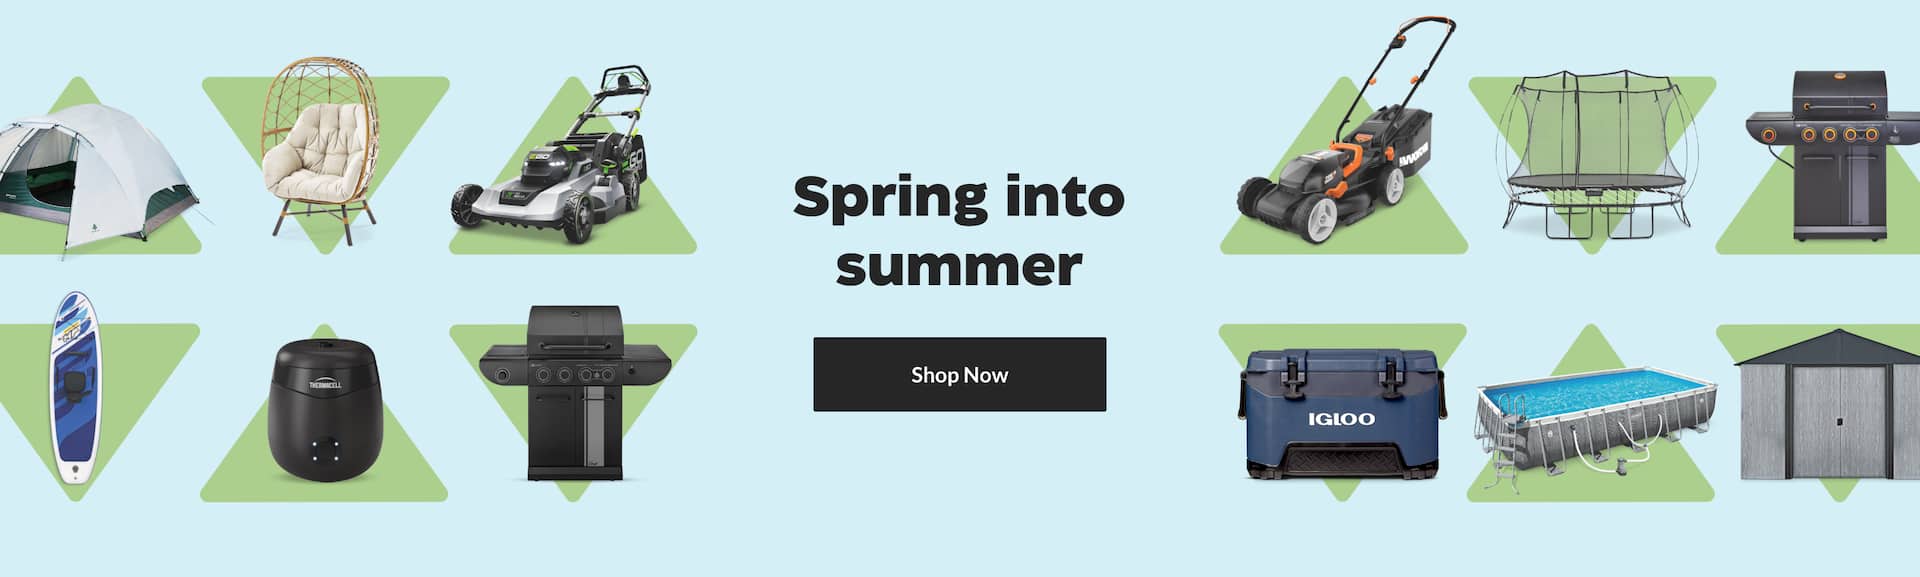 Various summer products including BBQs, pools and camping gear around a “Spring into summer” title.